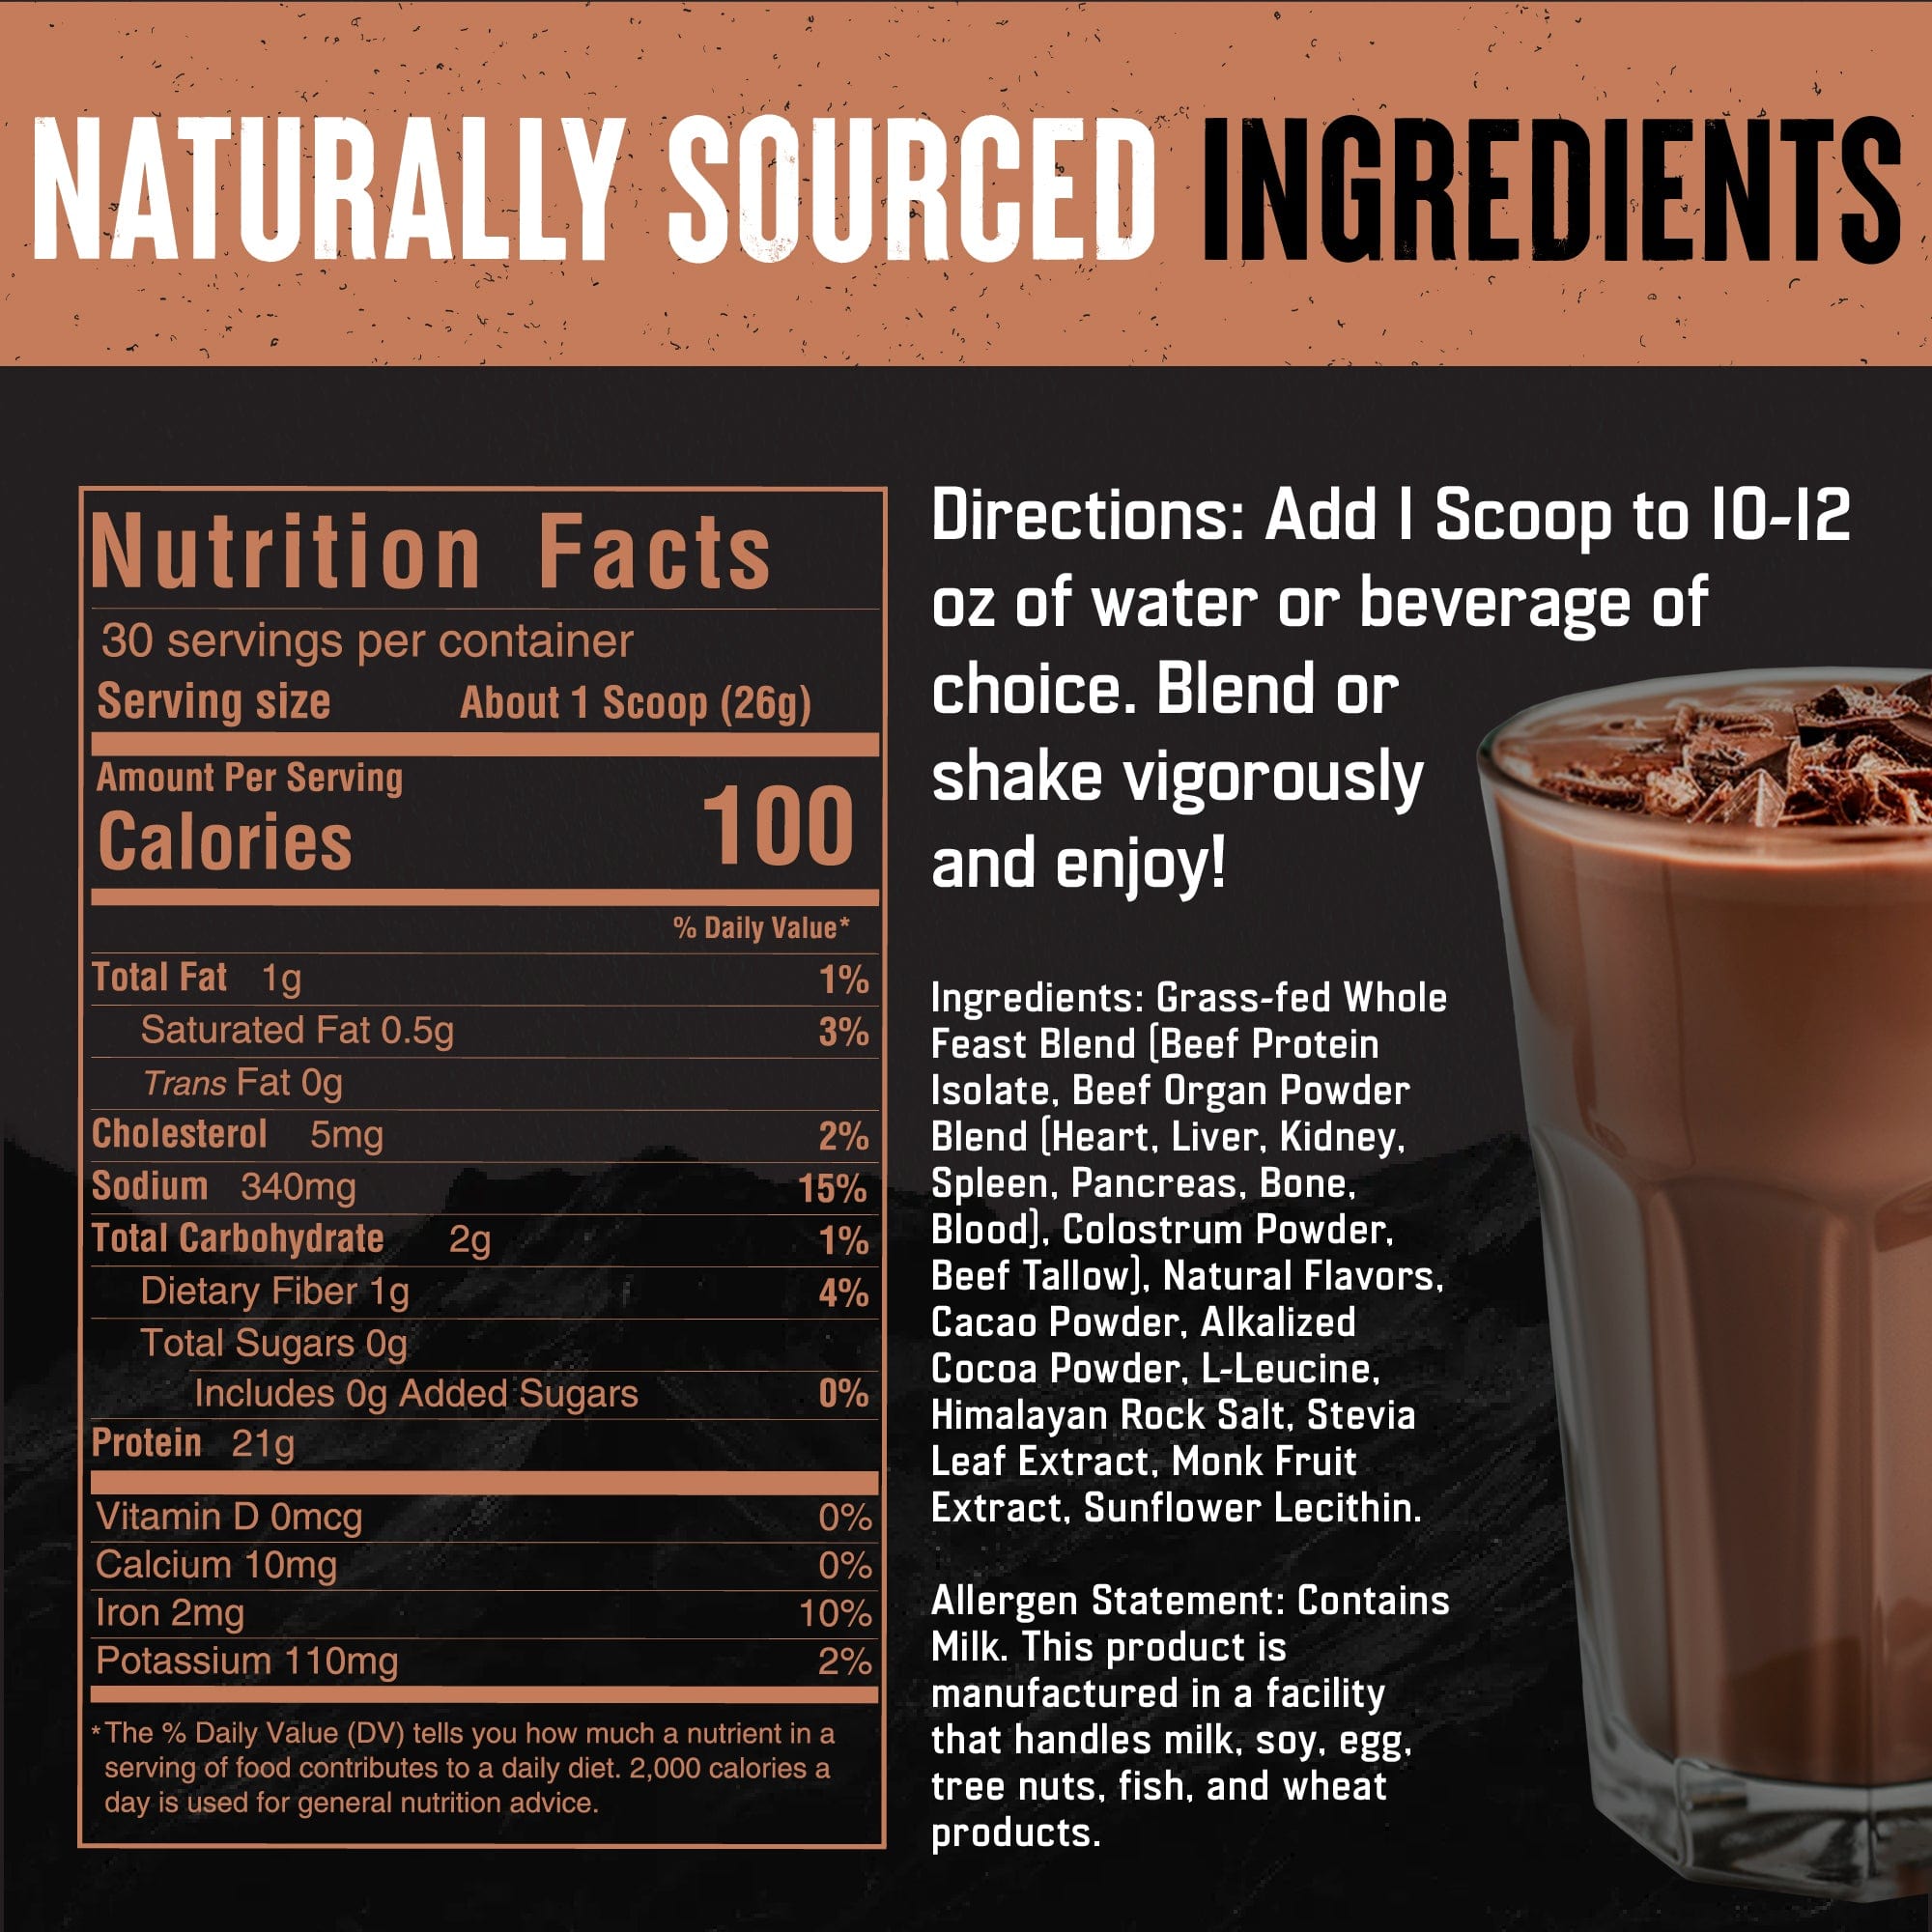 chocolate nutrition facts panel graphic showing the directions for serving - 1 scoop in 10-12 ounces of water or beverage of choice